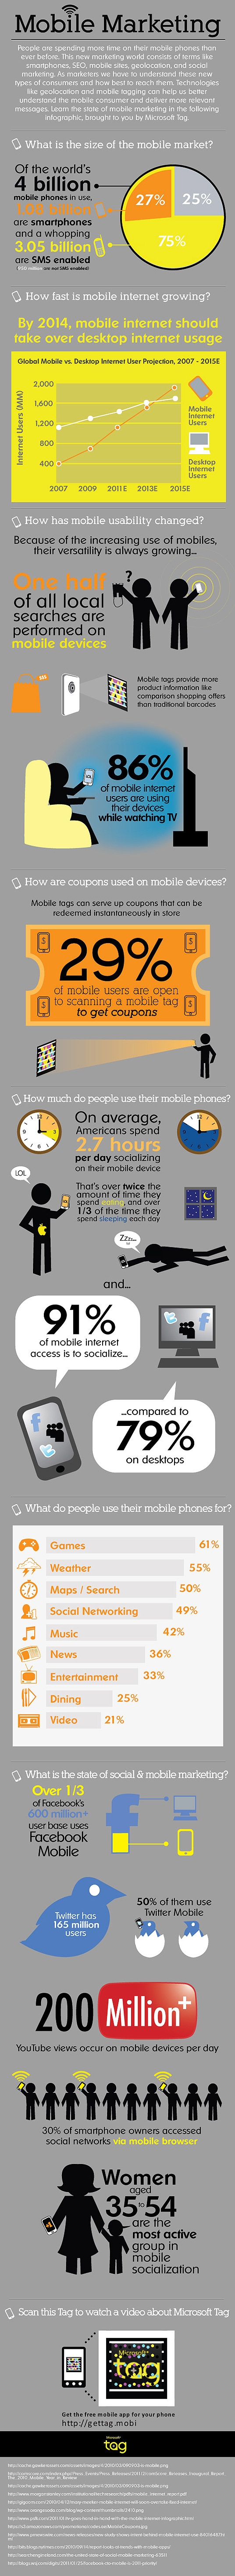 Awesome infographic about mobile phone use